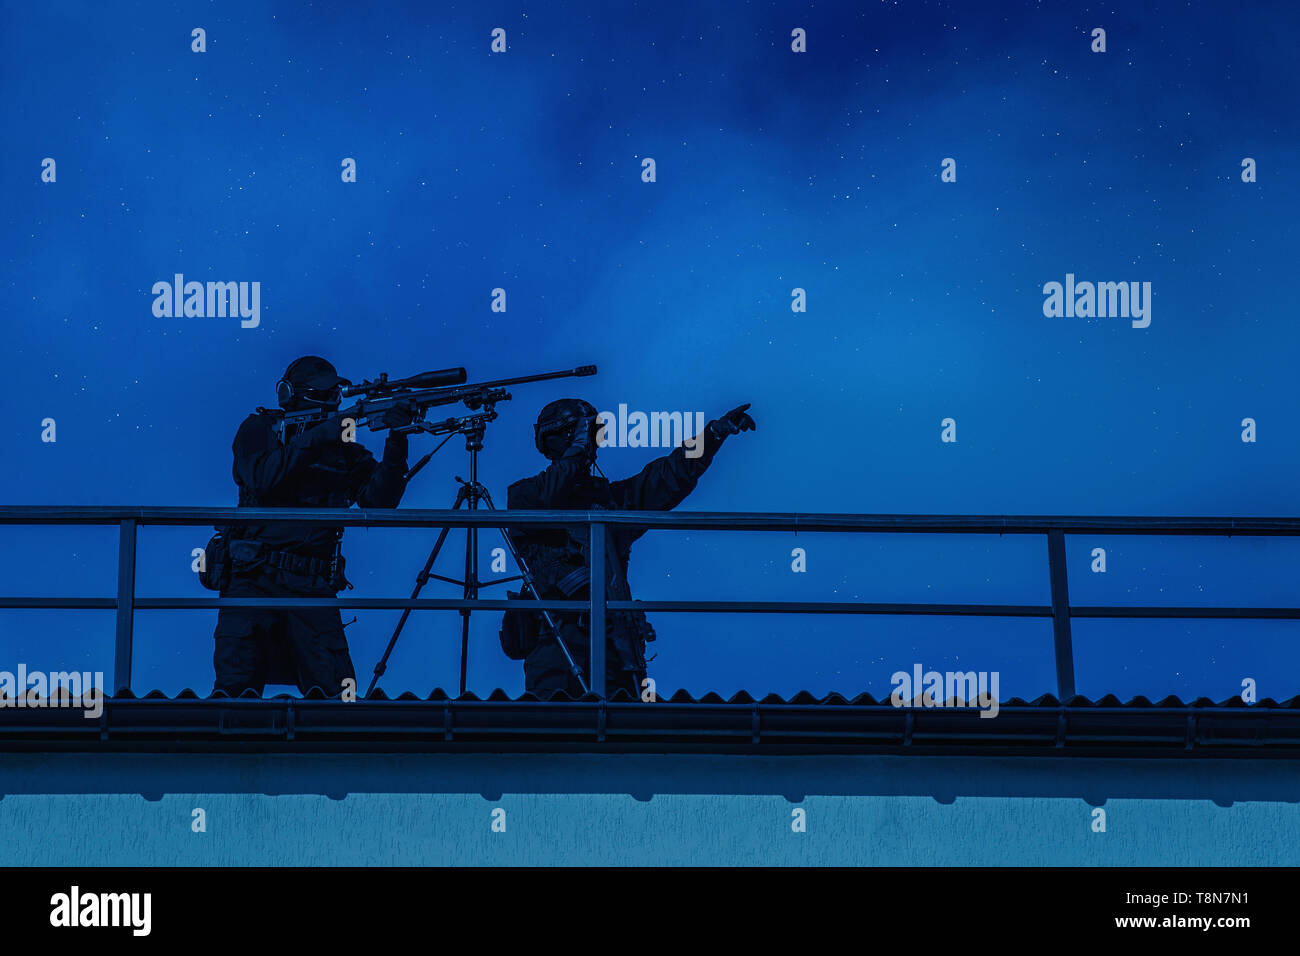 Sniper team searching target on city night mission Stock Photo